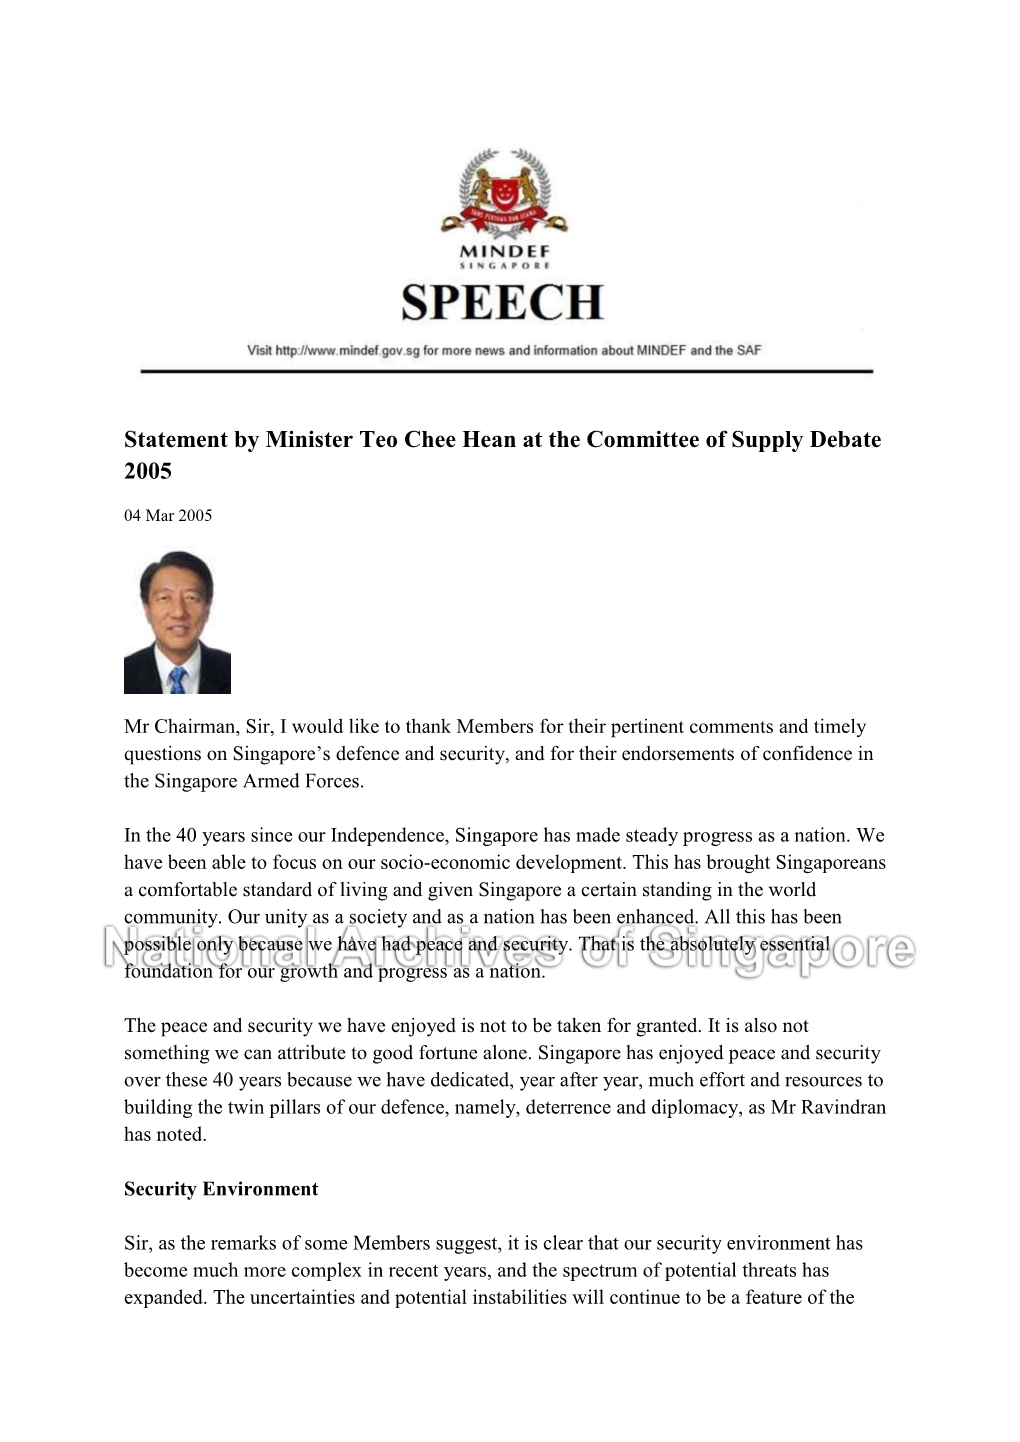 Statement by Minister Teo Chee Hean at the Committee of Supply Debate 2005